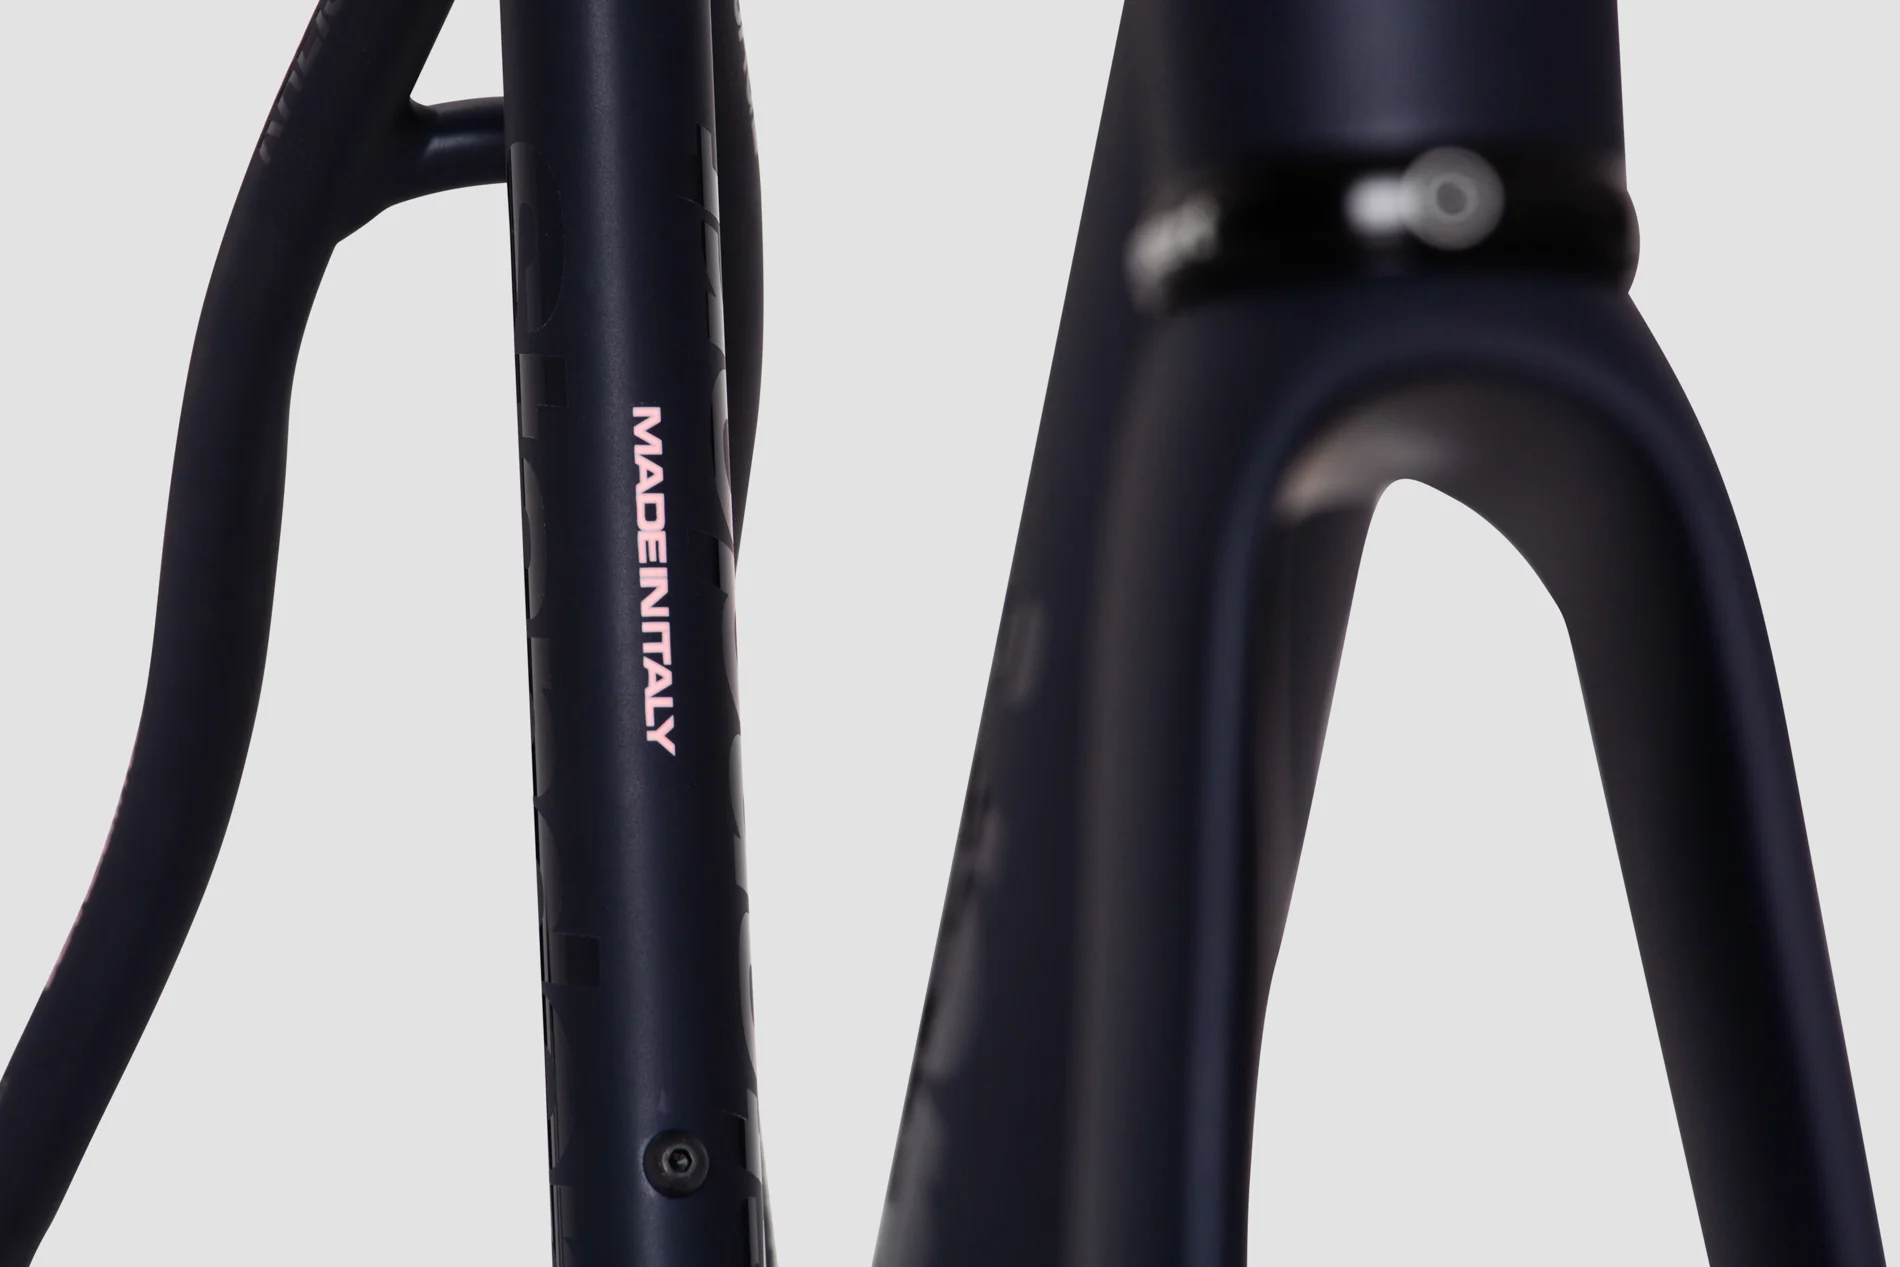 Kreissage RS Navy Road Bike Frame Made in Italy